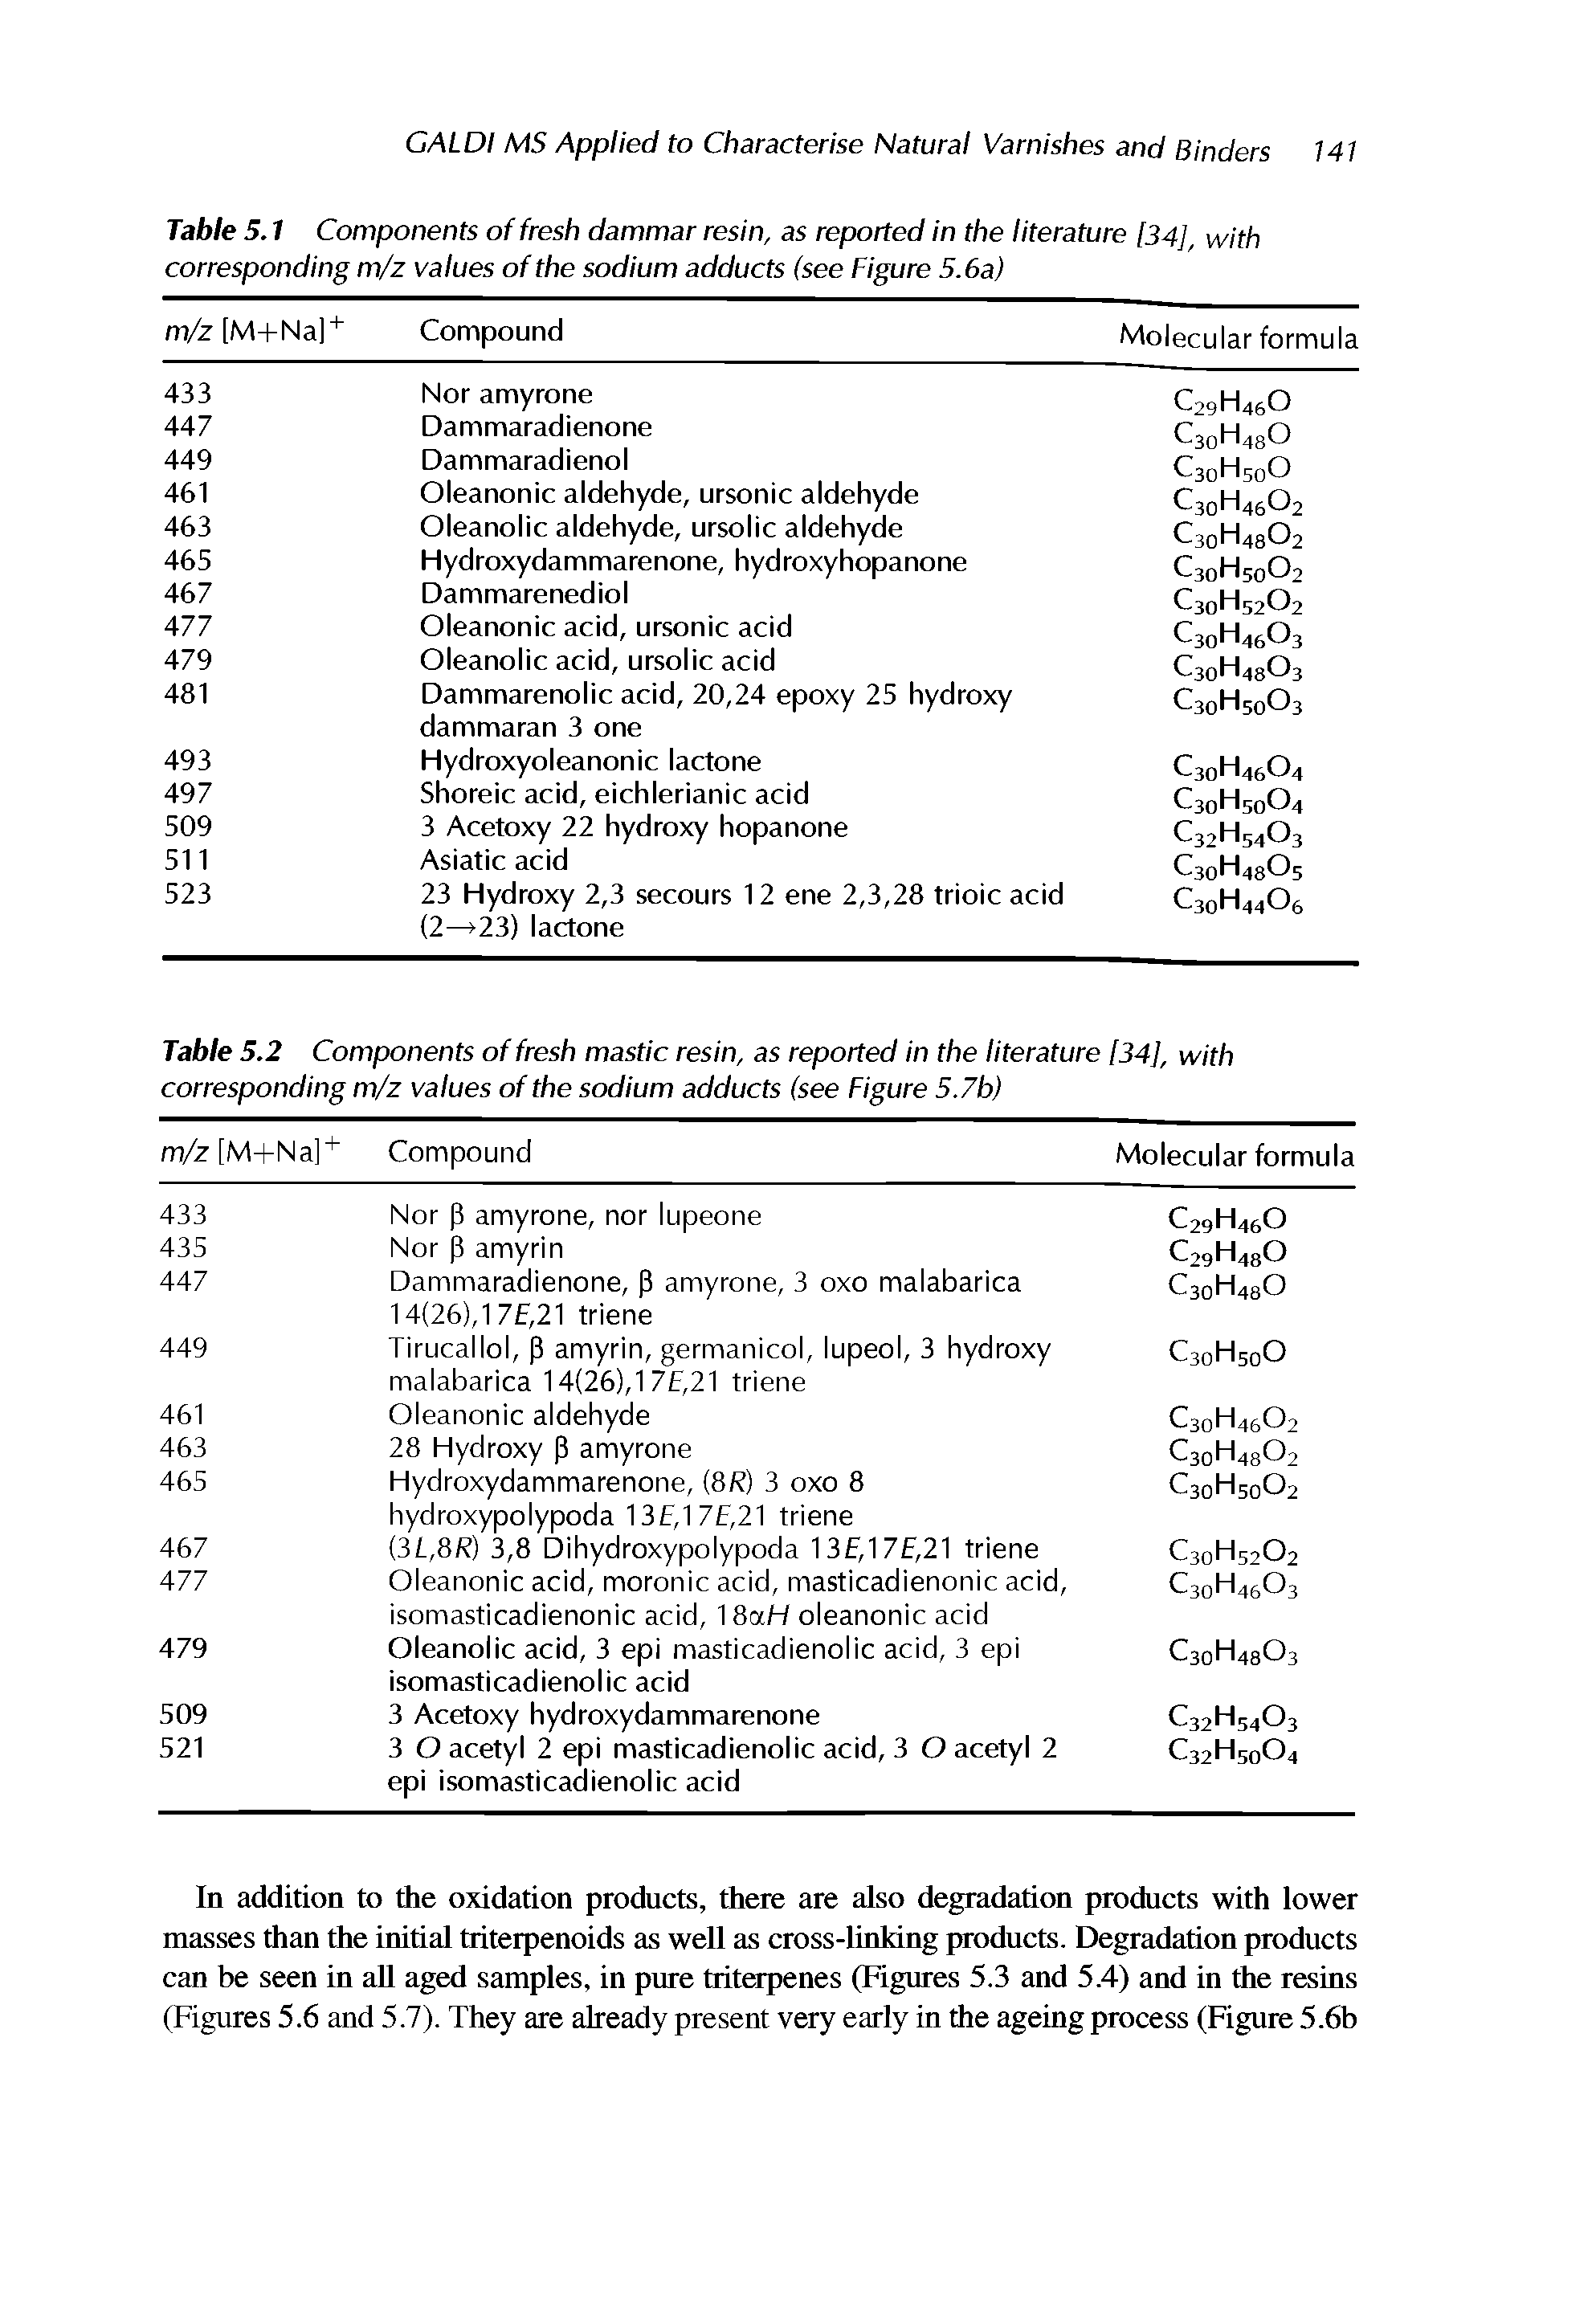 Table 5.2 Components of fresh mastic resin, as reported in the literature [34], with corresponding m/z values of the sodium adducts (see Figure 5.7b)...